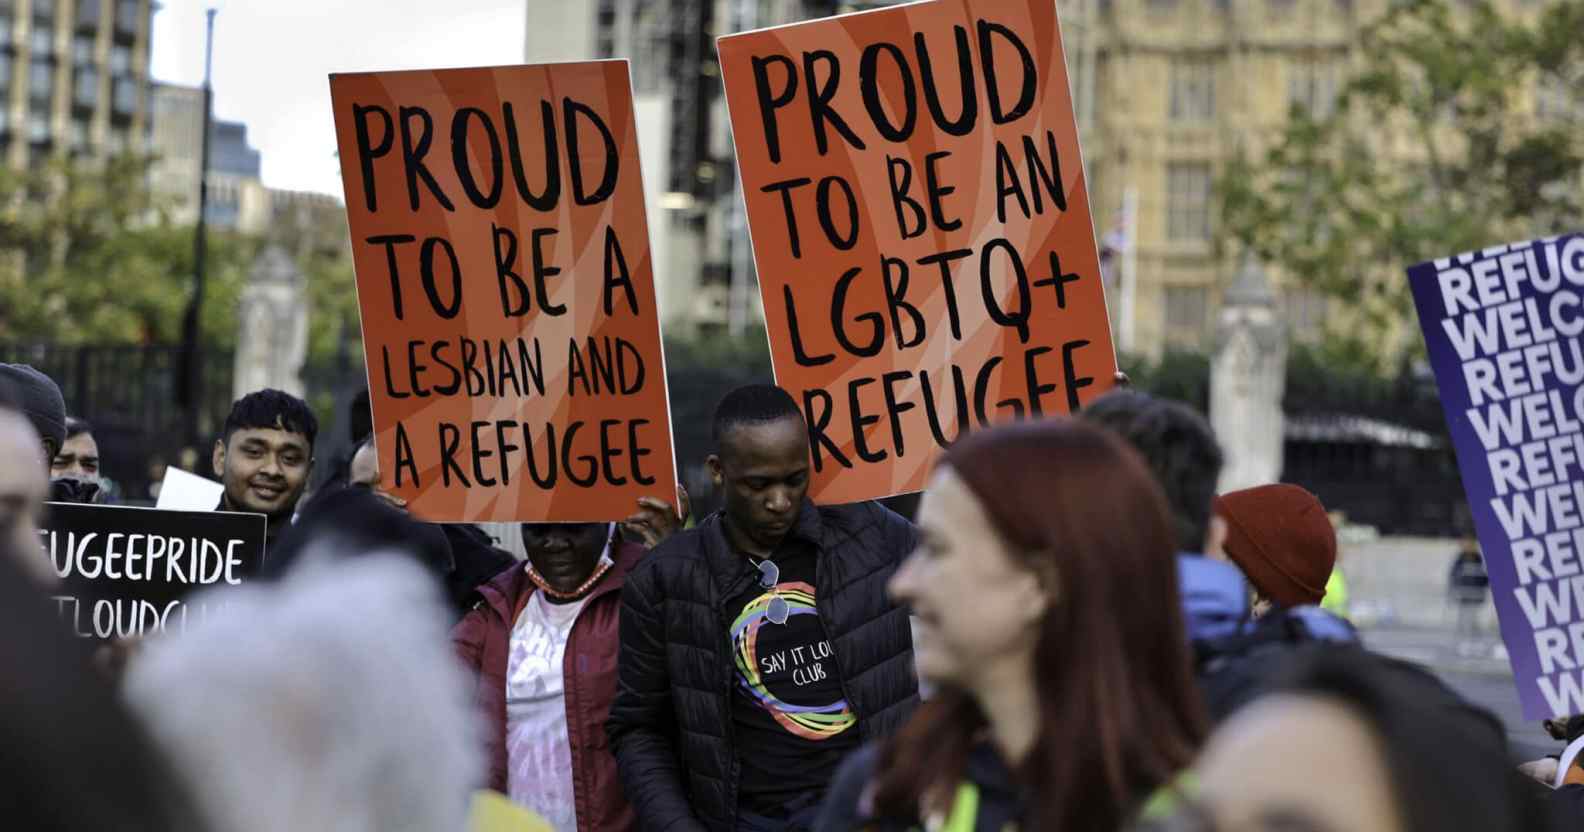 Protesters buttress placards up high standing in solidarity with queer refugees in Parliament Square